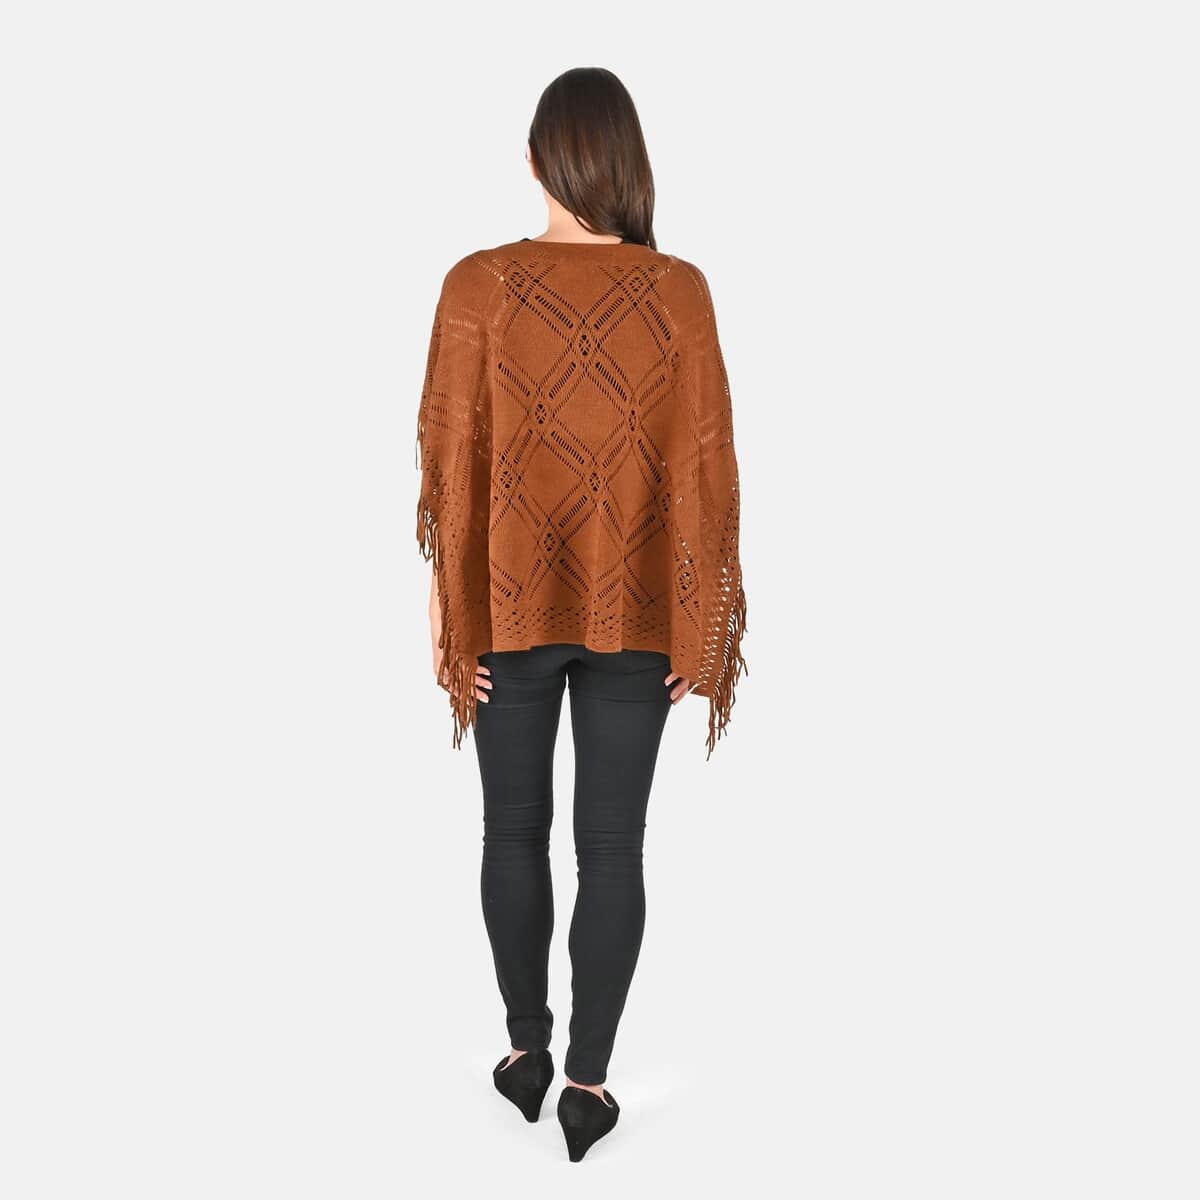 Passage Knitted Brown Poncho with Tassels (One Size Fits Most) image number 1